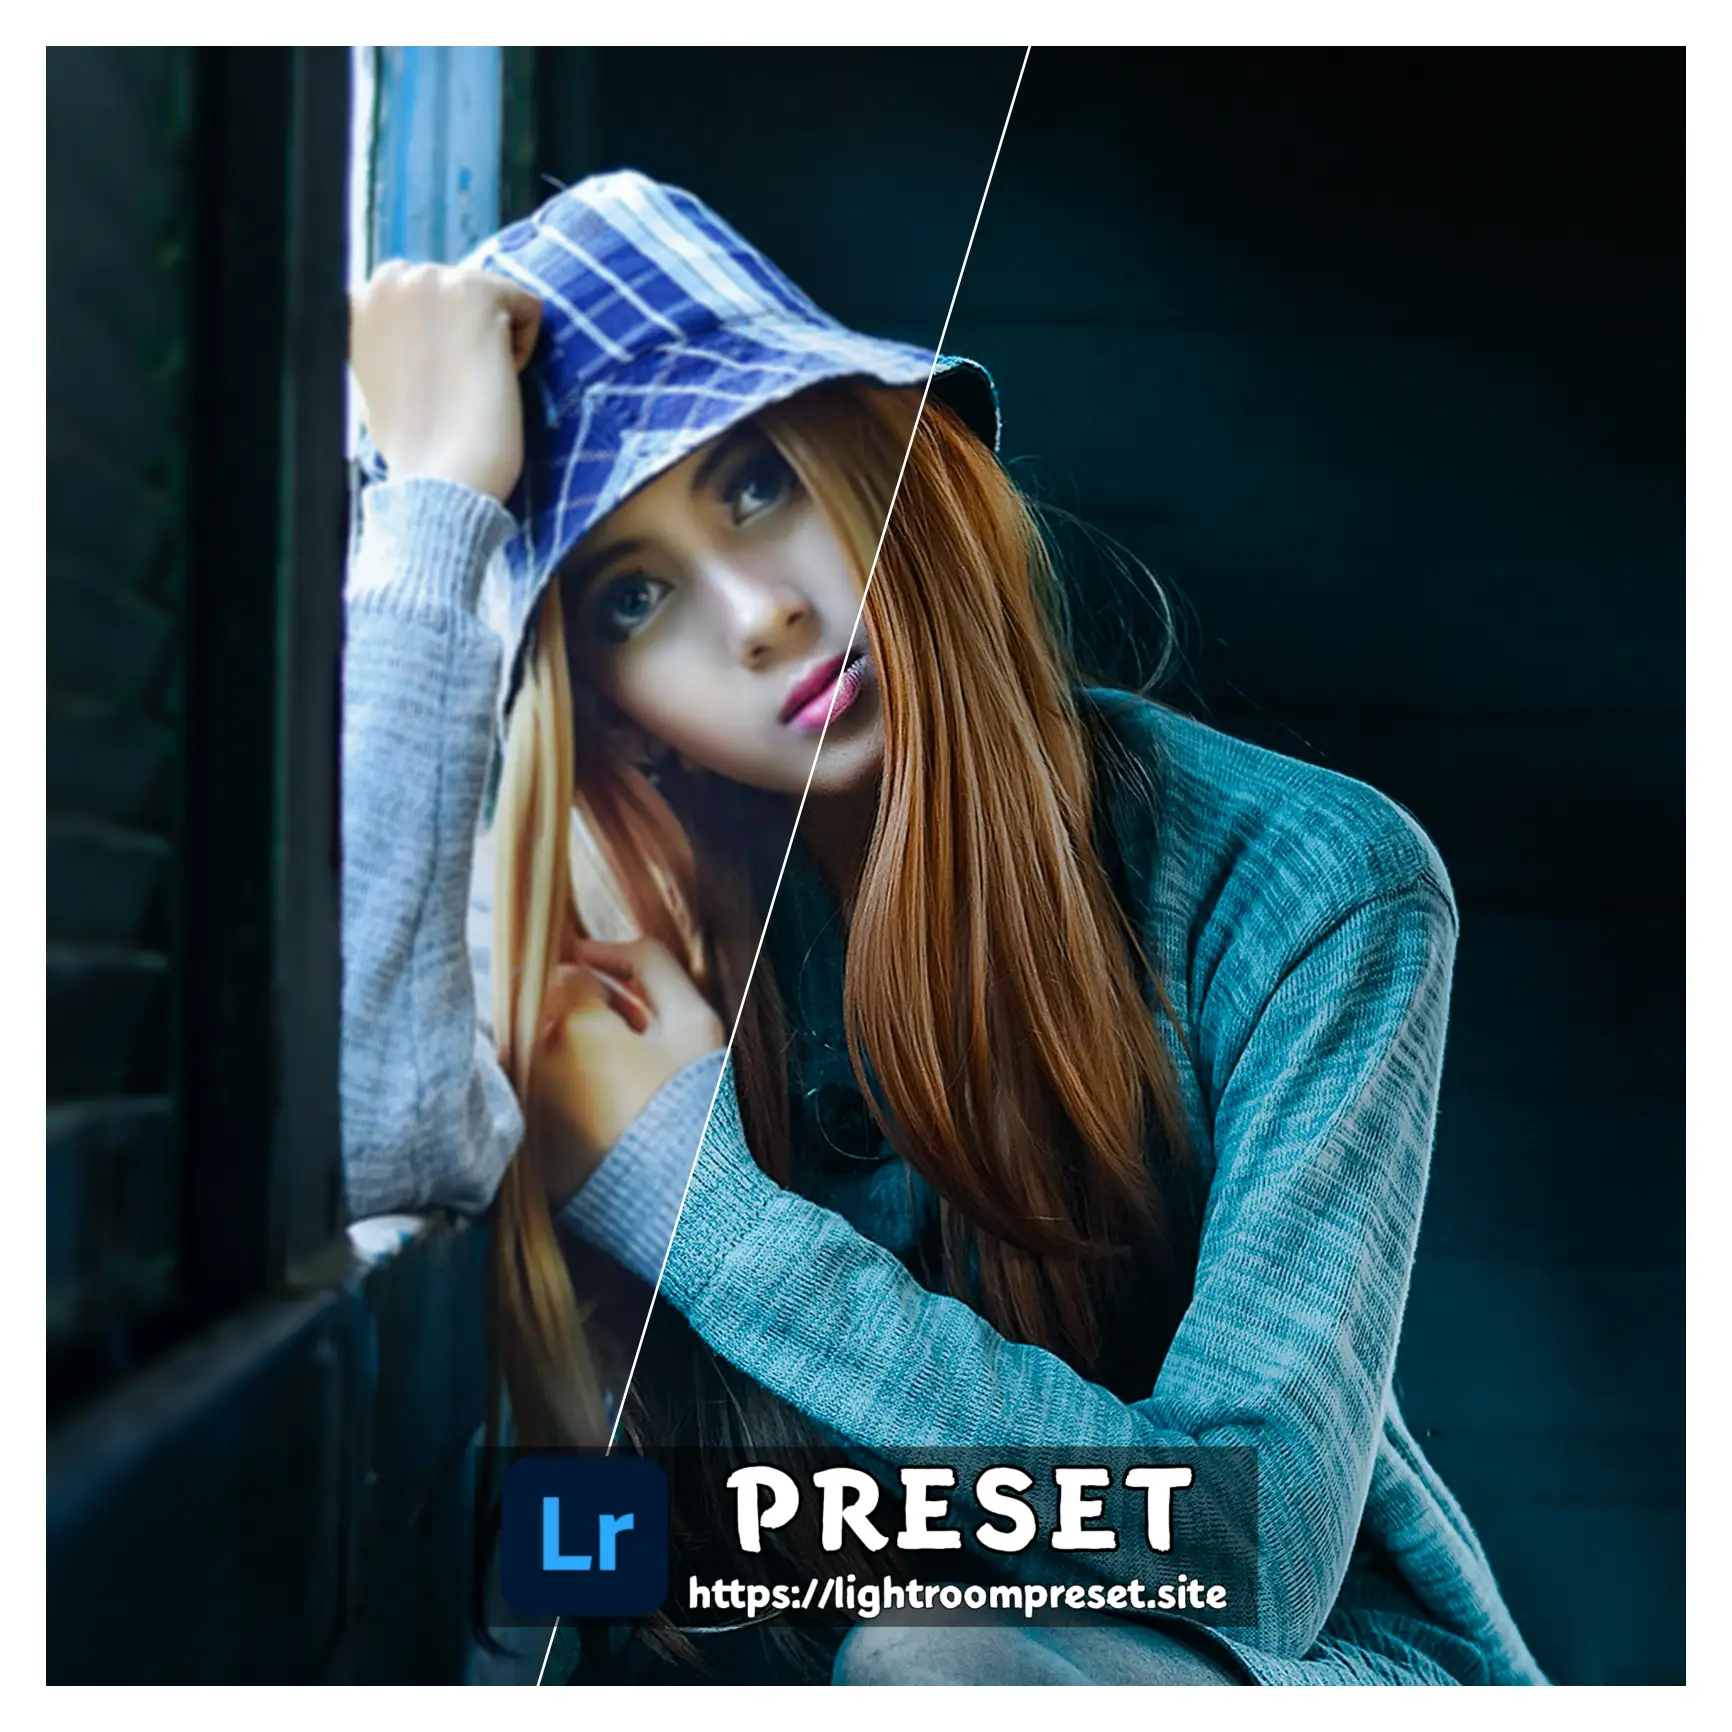 You are currently viewing Grunge lightroom presets download free